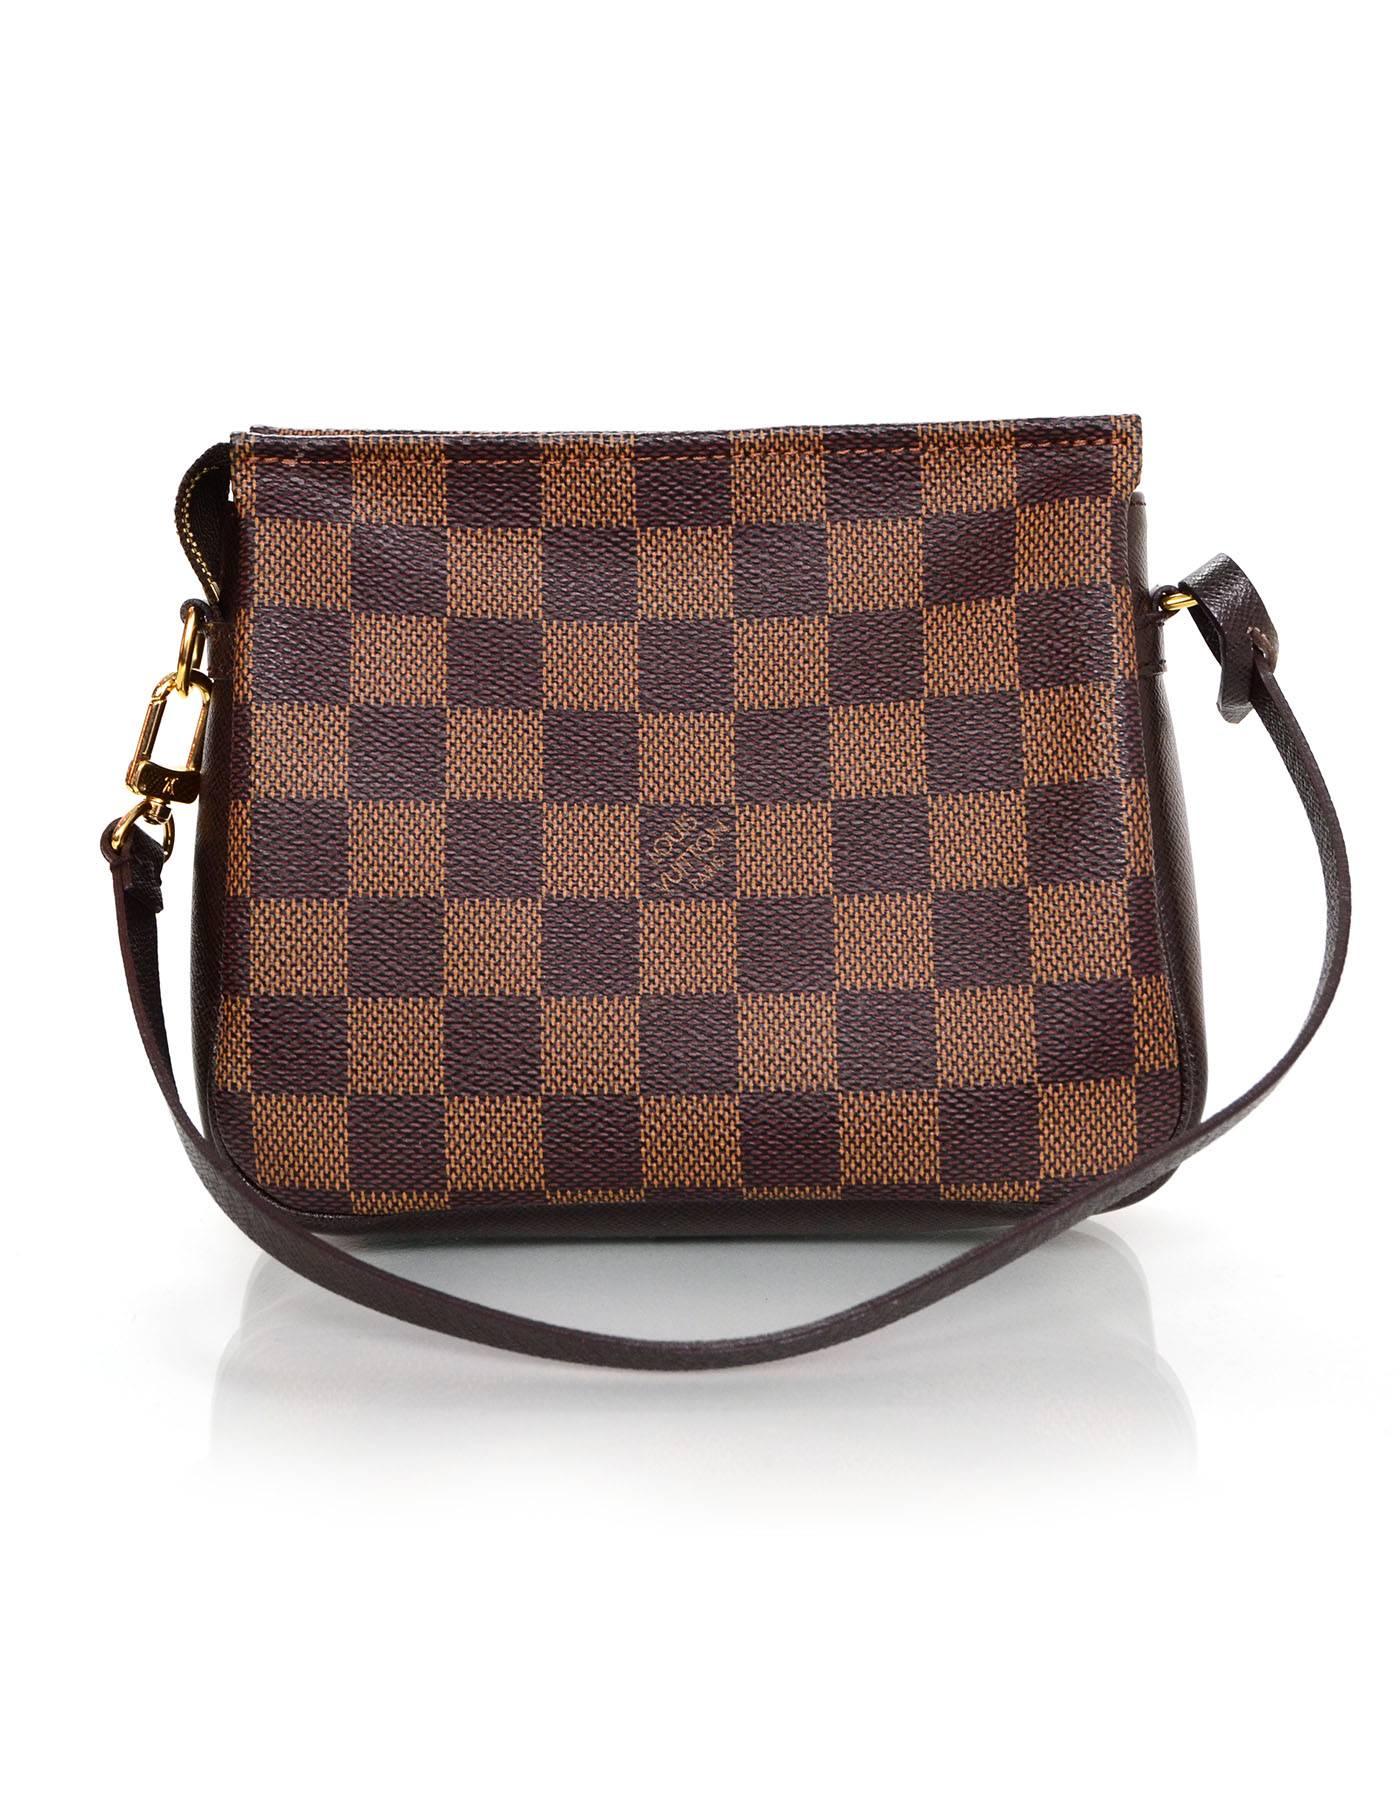 Louis Vuitton Damier Square Trousse Pochette
Shoulder strap can be removed or altered to be worn as a clutch or wristlet

Made In: France
Year of Production: 2000
Color: Brown
Hardware: Goldtone
Materials: Coated canvas and leather
Lining: